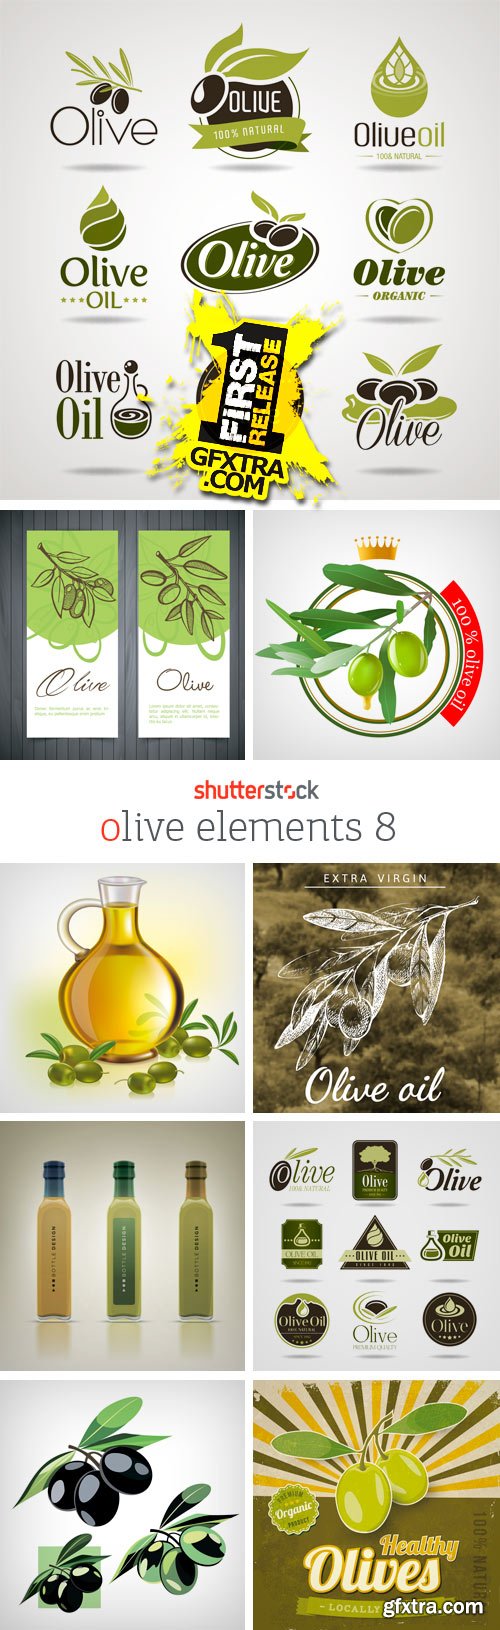 Collections of Olive Elements 8, 25xEPS